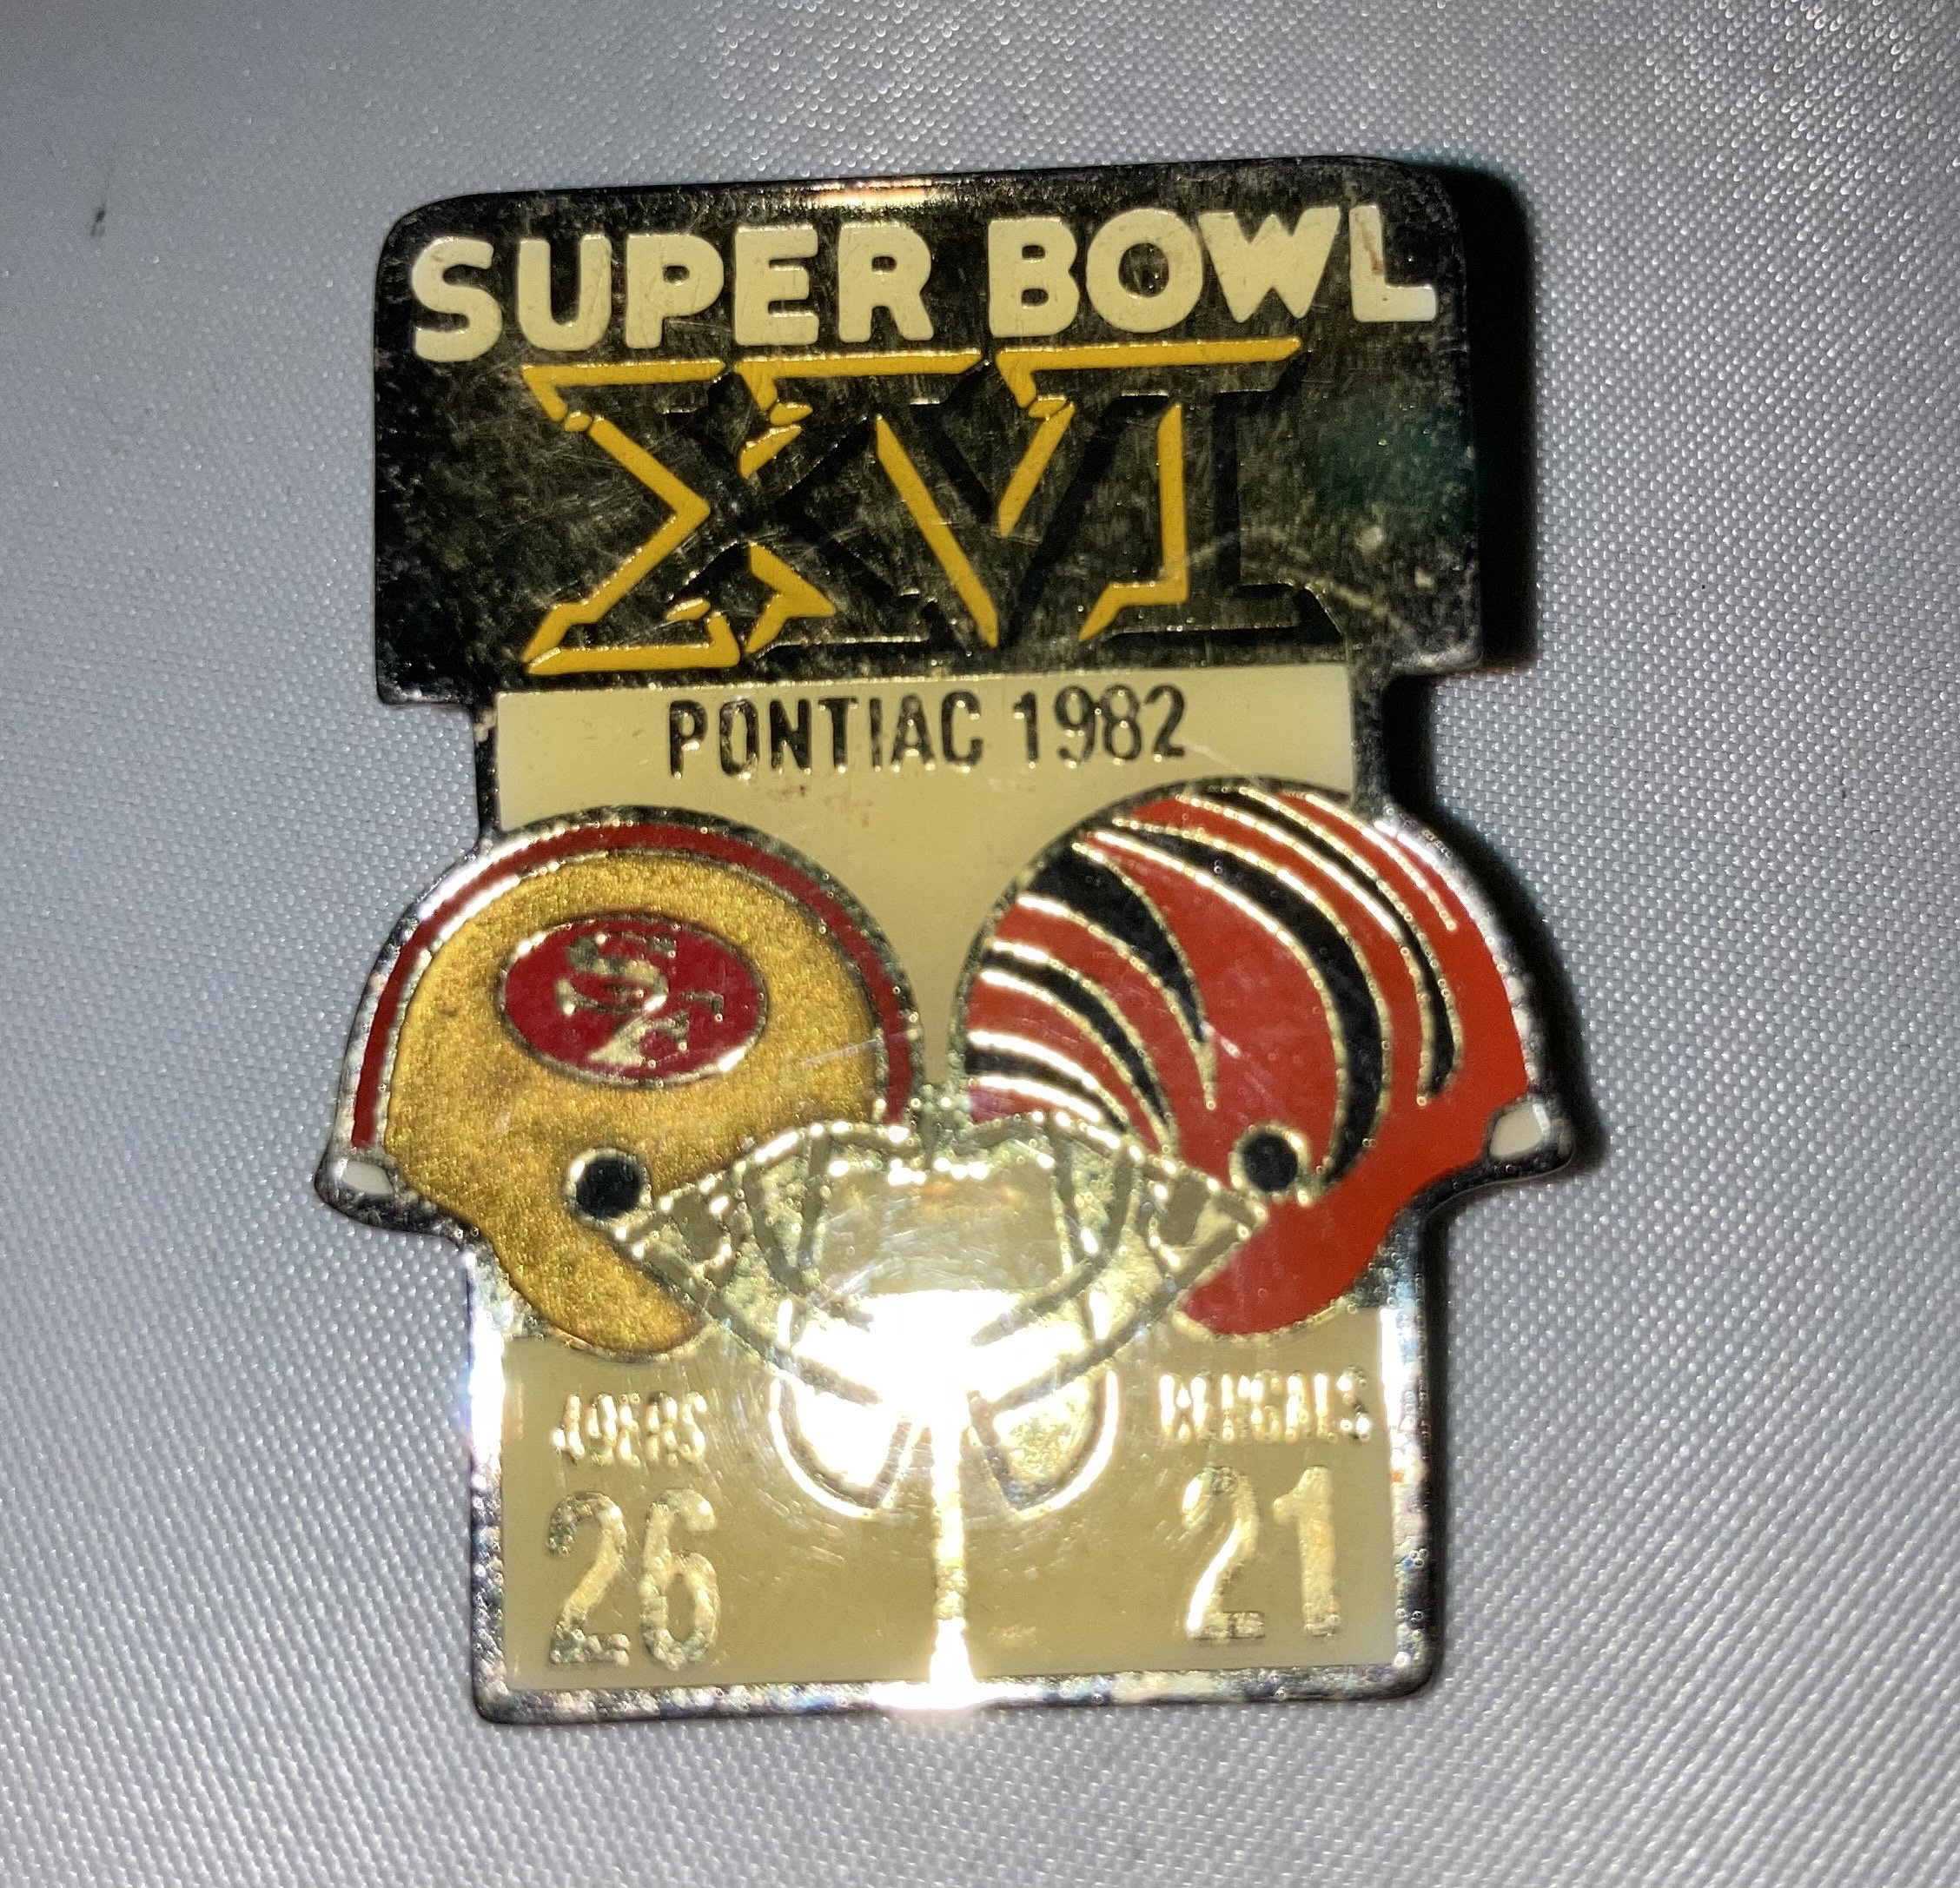 Buy Nfl Super Bowl Patch Online In India -  India